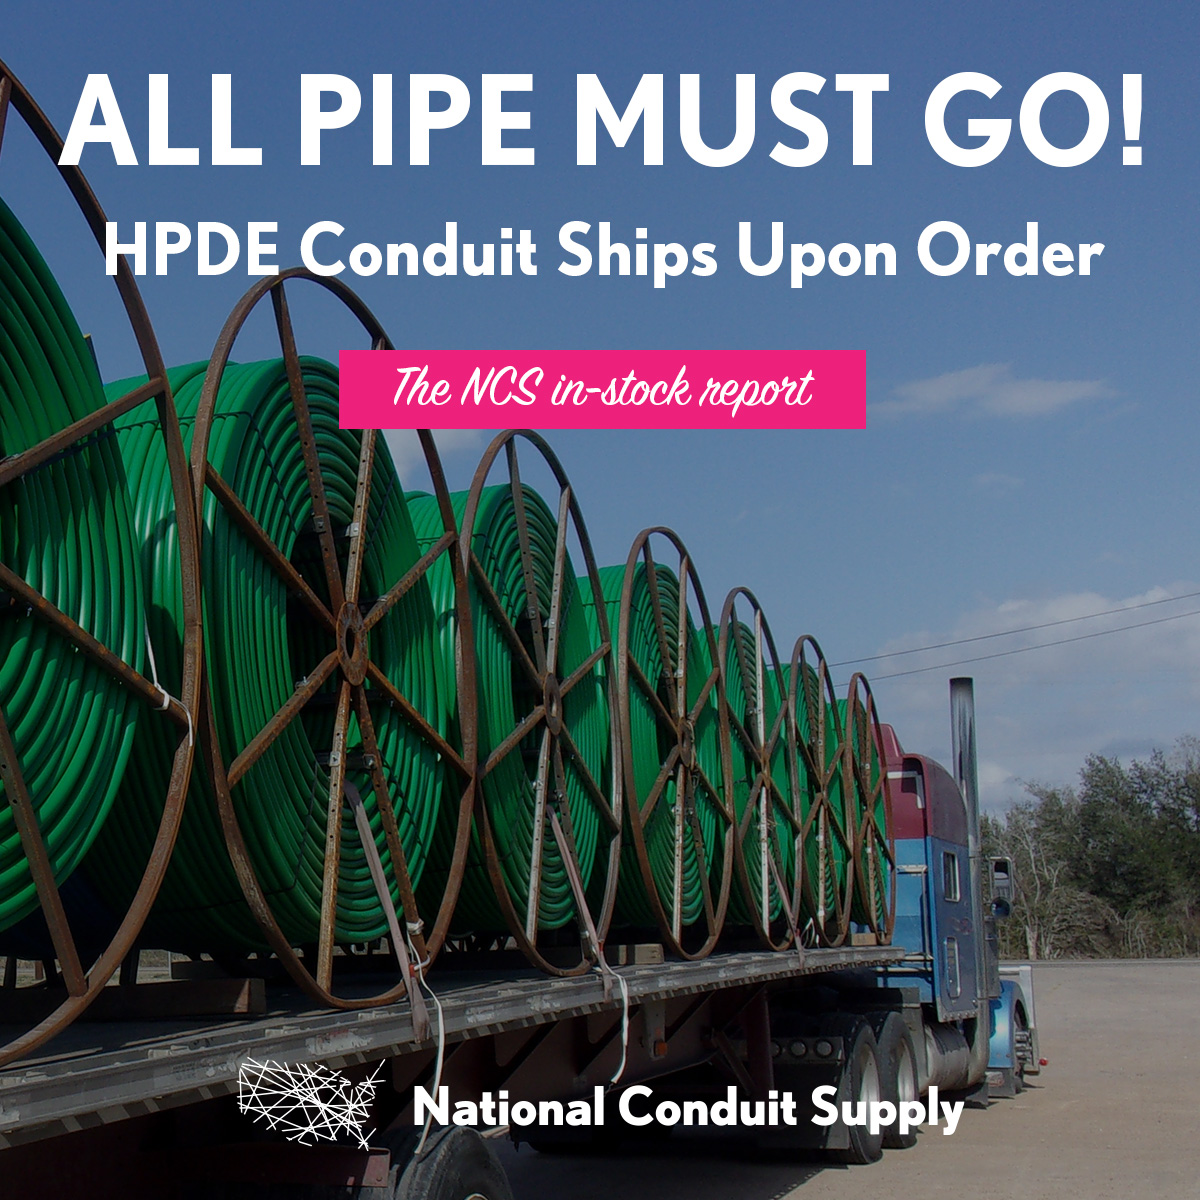 We need room in the warehouse, so buy some of this #HDPE!

Trucks out today, here’s the inventory:
mailchi.mp/conduitsupply/…

.

.

.

.

#hdpepipe #hdpeconduit #conduit #telecom #broadband #telecommunications #5G #6G #fixedwireless #fiberoptics #Undergroundcable